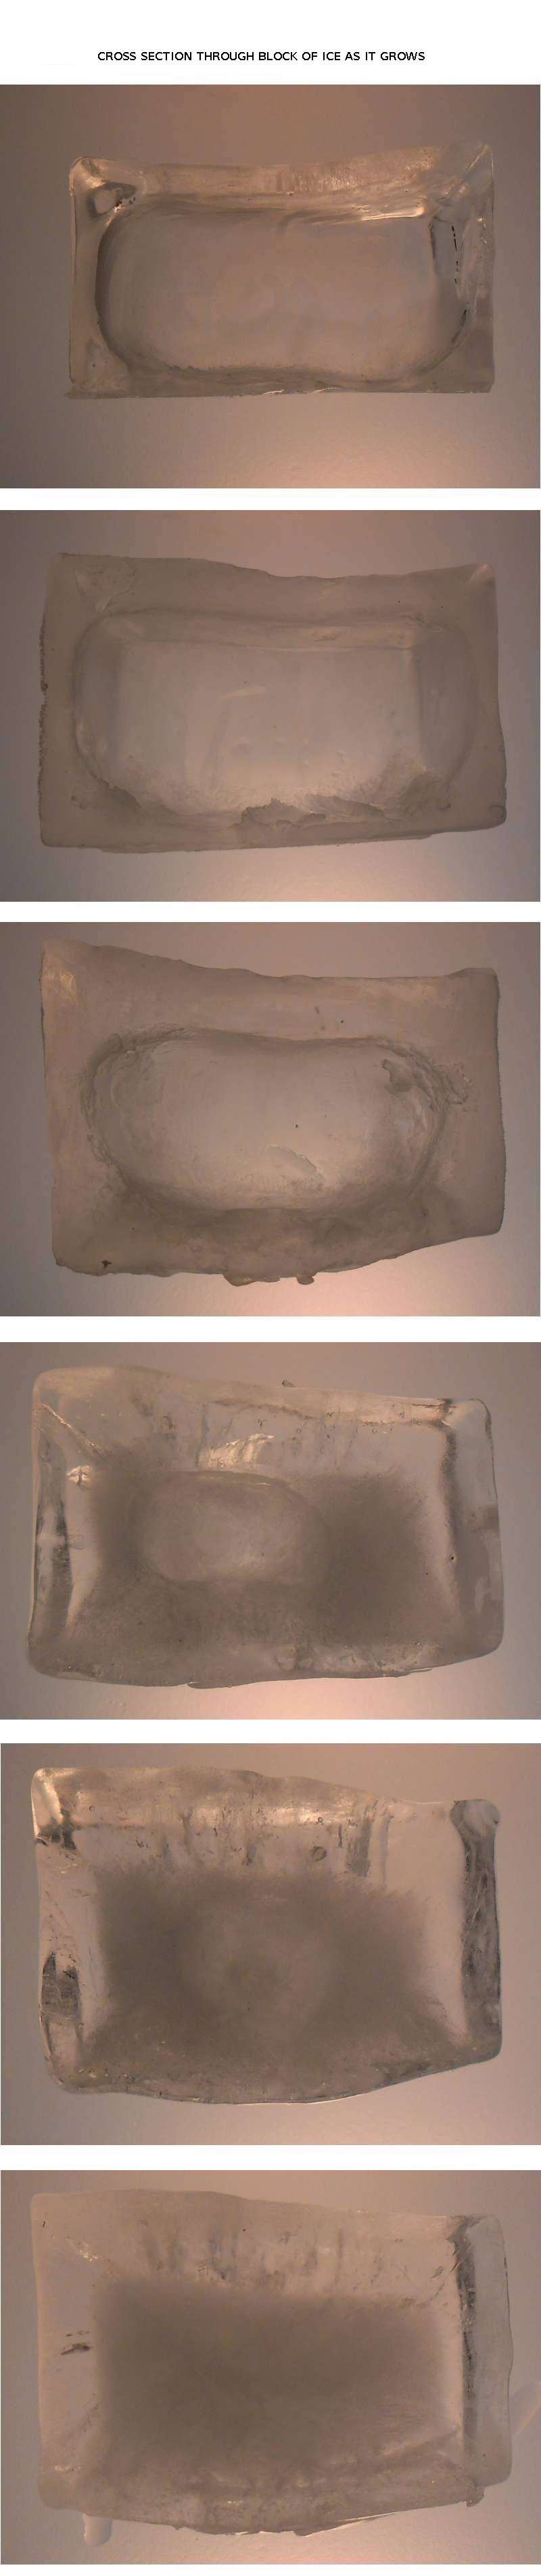 Autopsy of cold start and hot start ice cubes